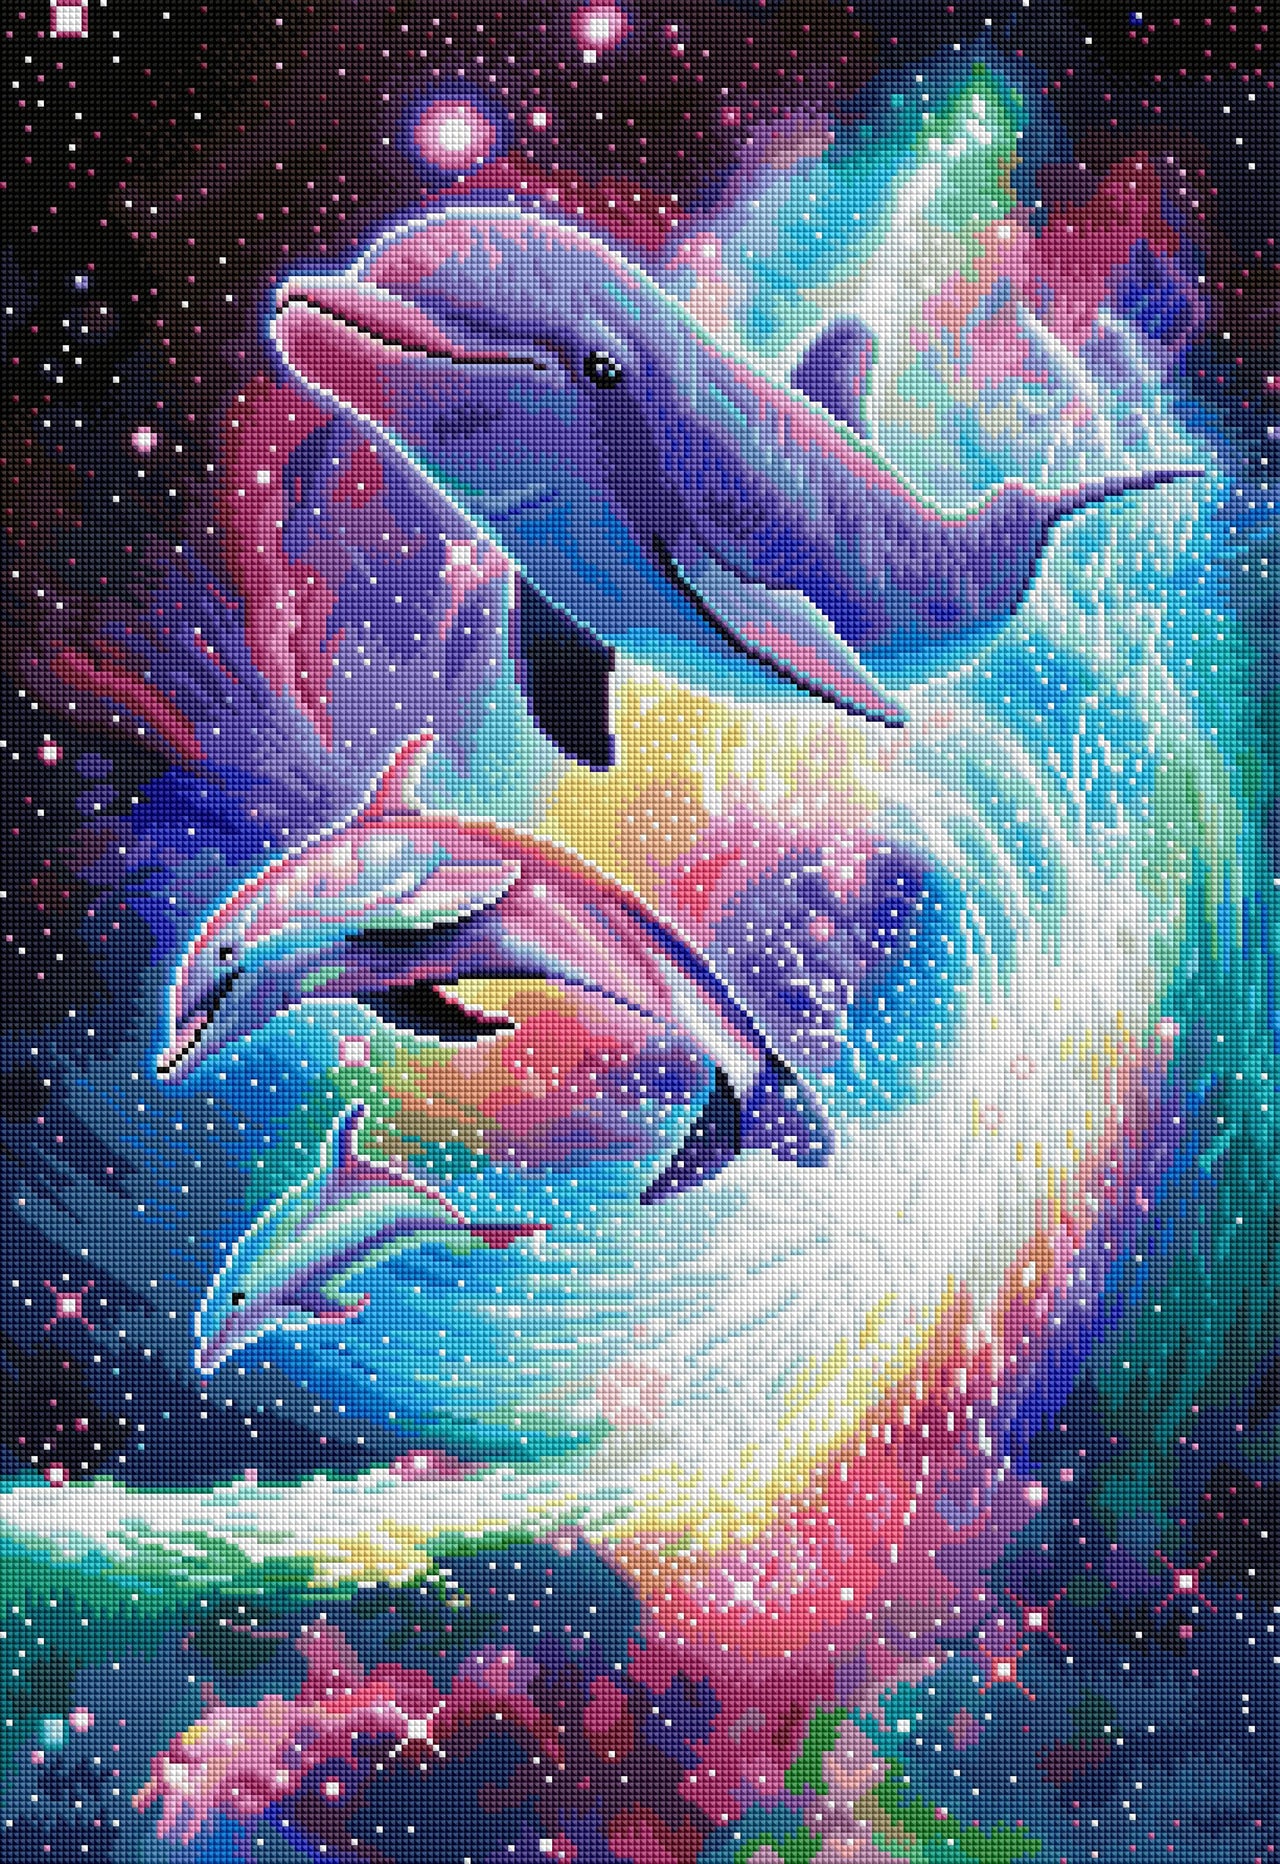 Diamond Painting Dolphins 20" x 29" (50.8cm x 74cm) / Square with 61 Colors including 5 ABs / 60,588